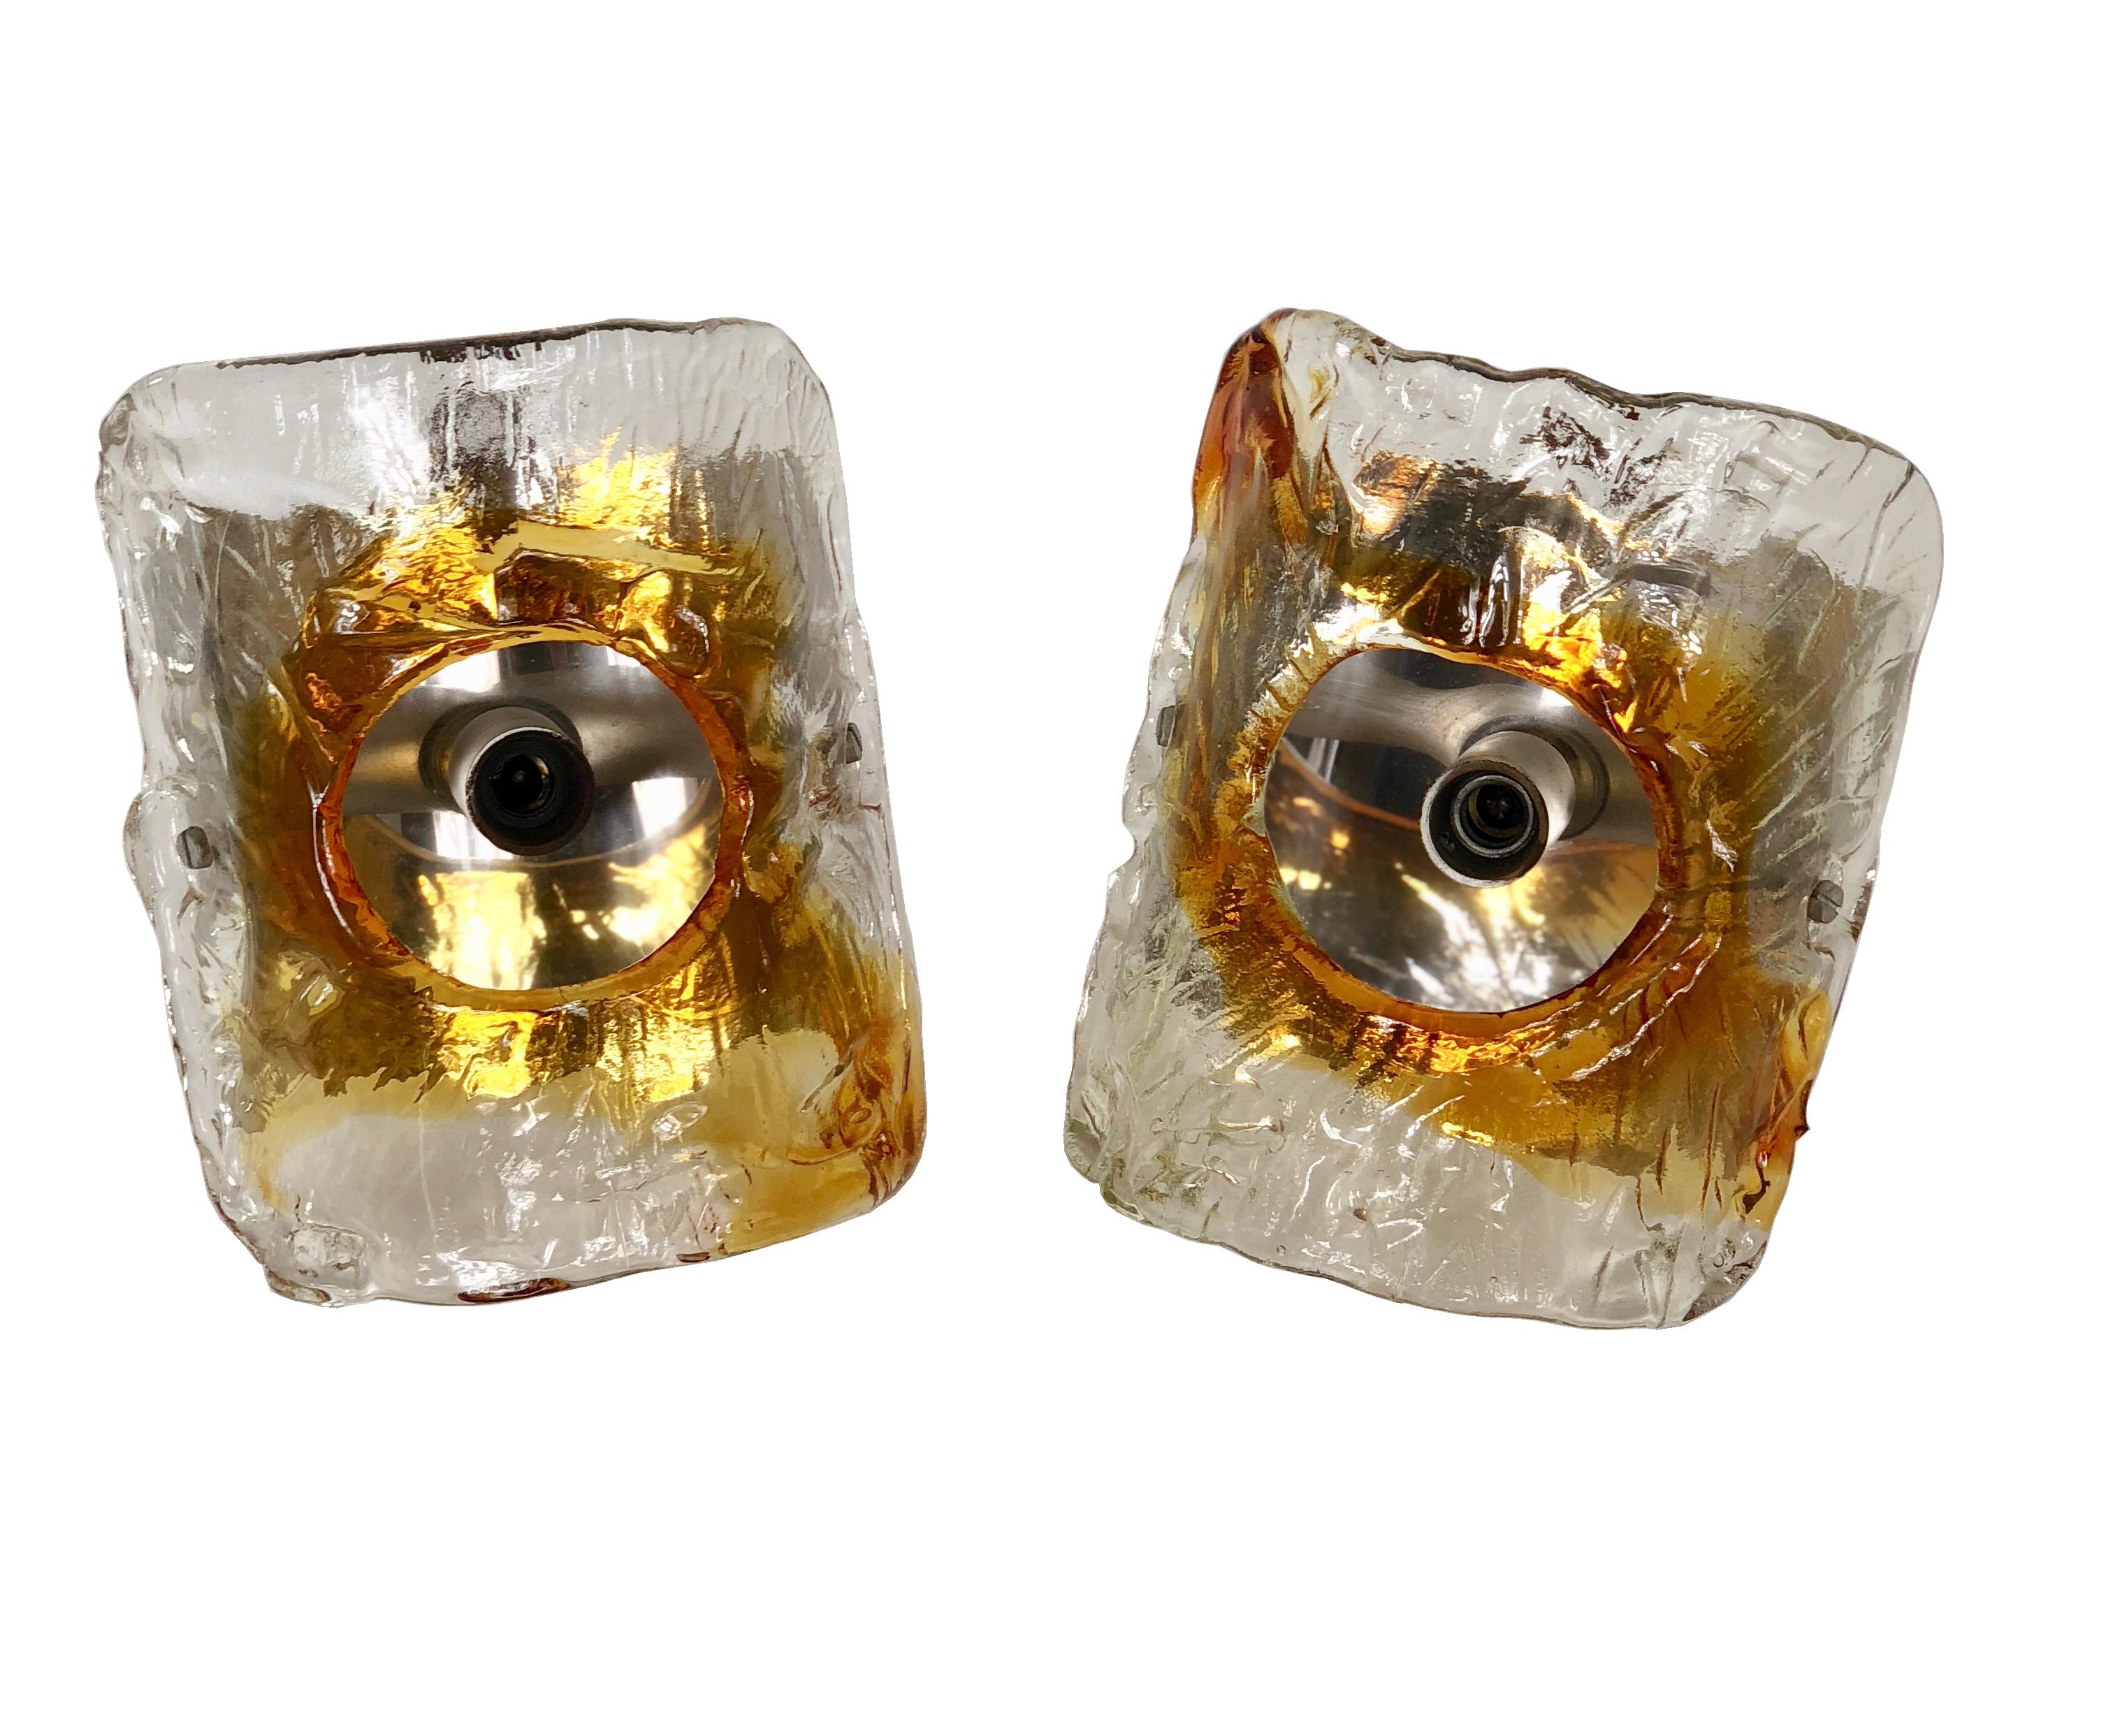 A pair of Italian wall sconces by Mazzega, produced, circa 1970s, each with convex shades in textured clear and amber Murano glass, surrounding a single exposed socket, affixed to a chrome backplate.